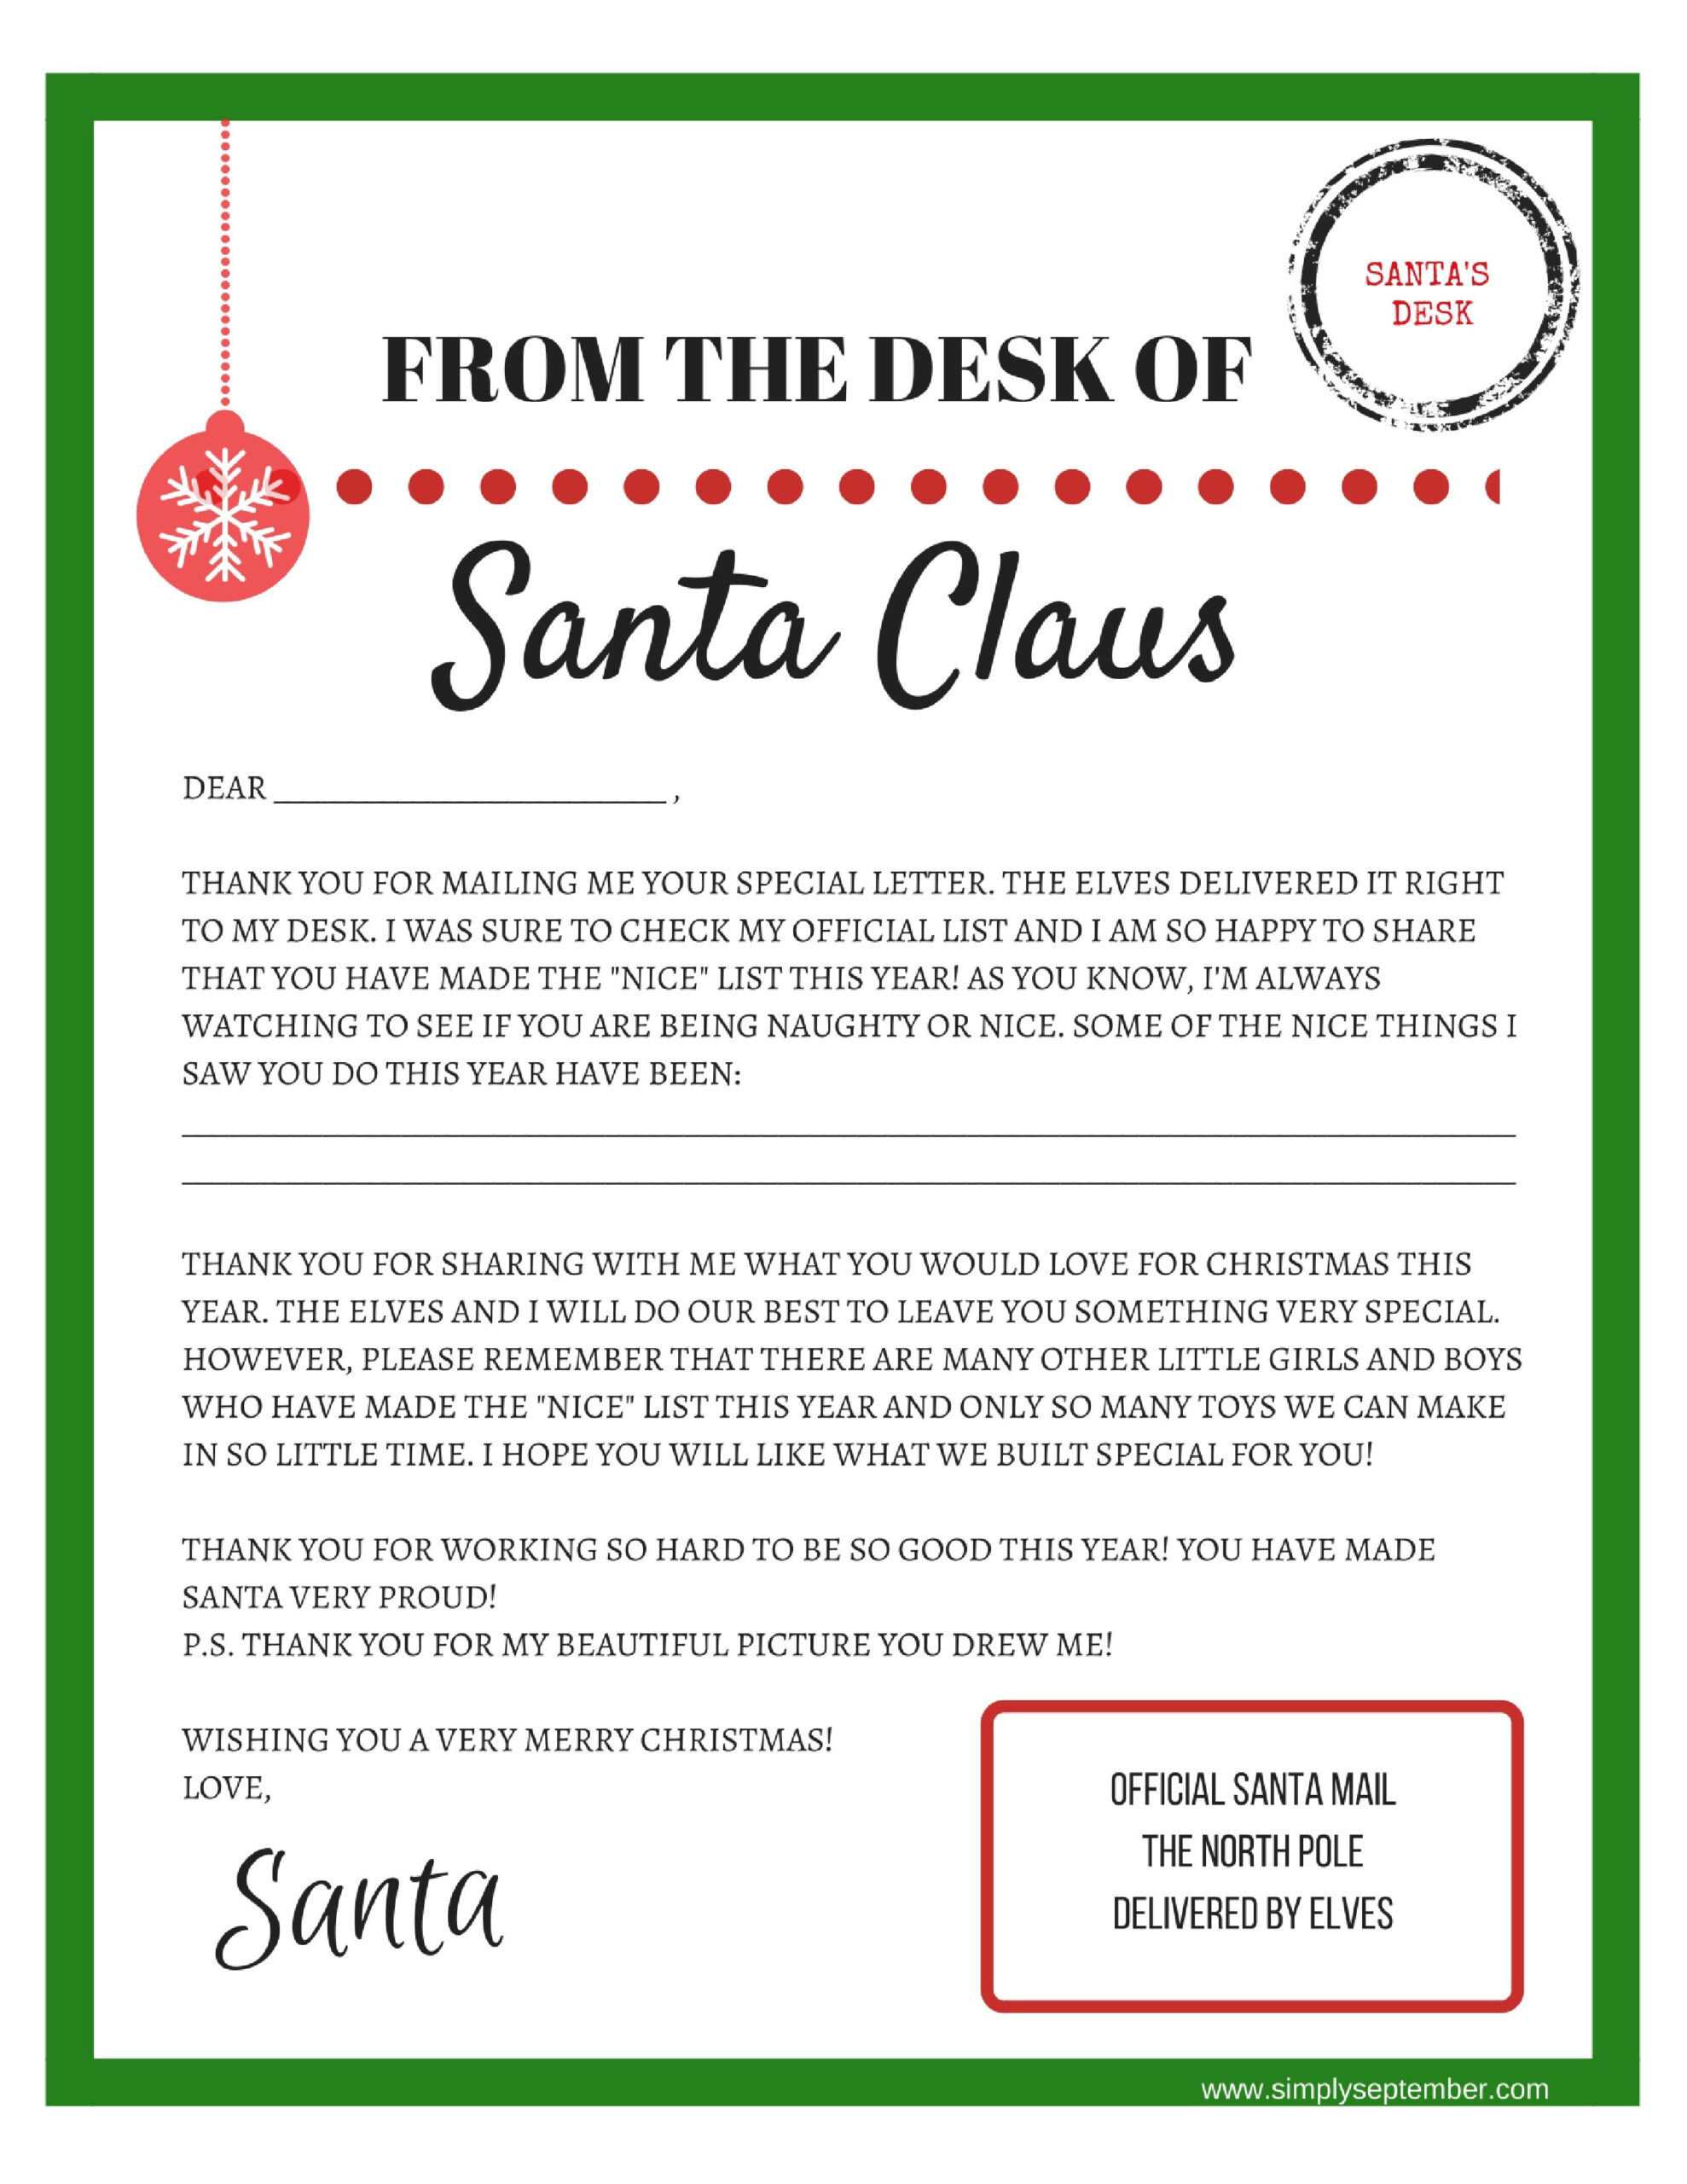 Letters To And From Santa: Free Printables - Simply September intended for Free Printable Letters From Santa